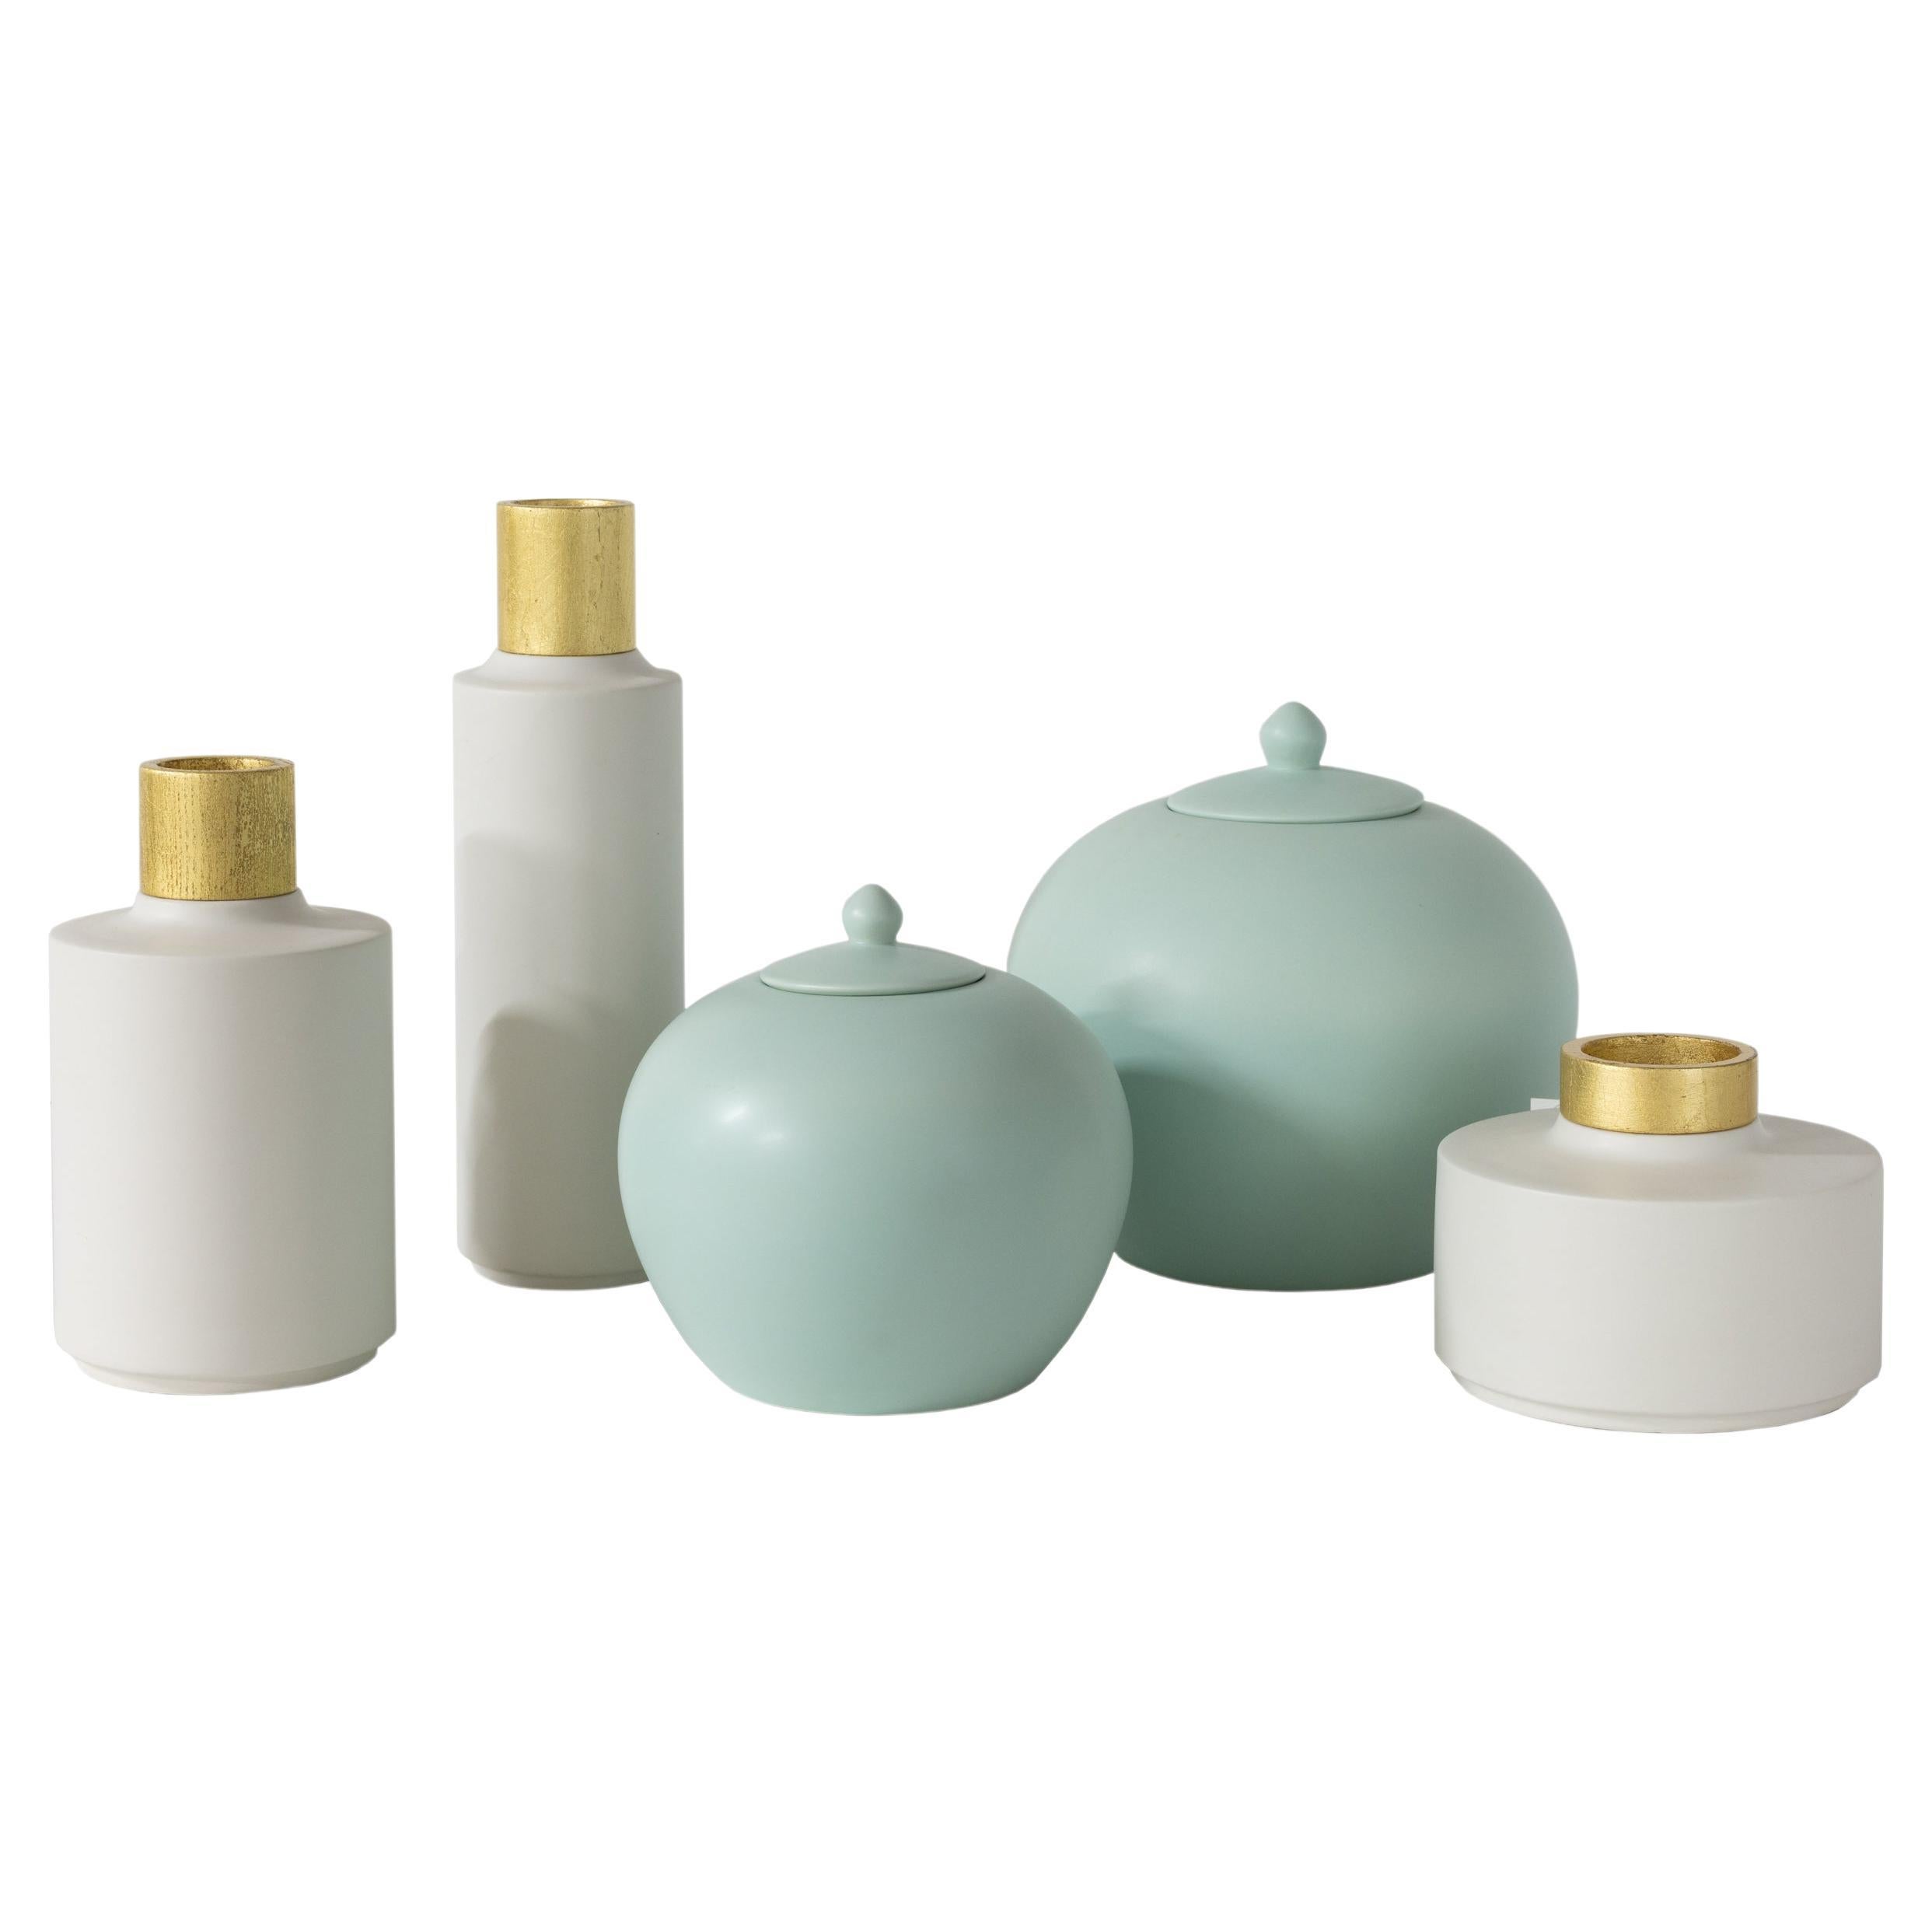 Set/5 Jars & Pots, White & Mint Green, Handmade in Portugal by Lusitanus Home For Sale